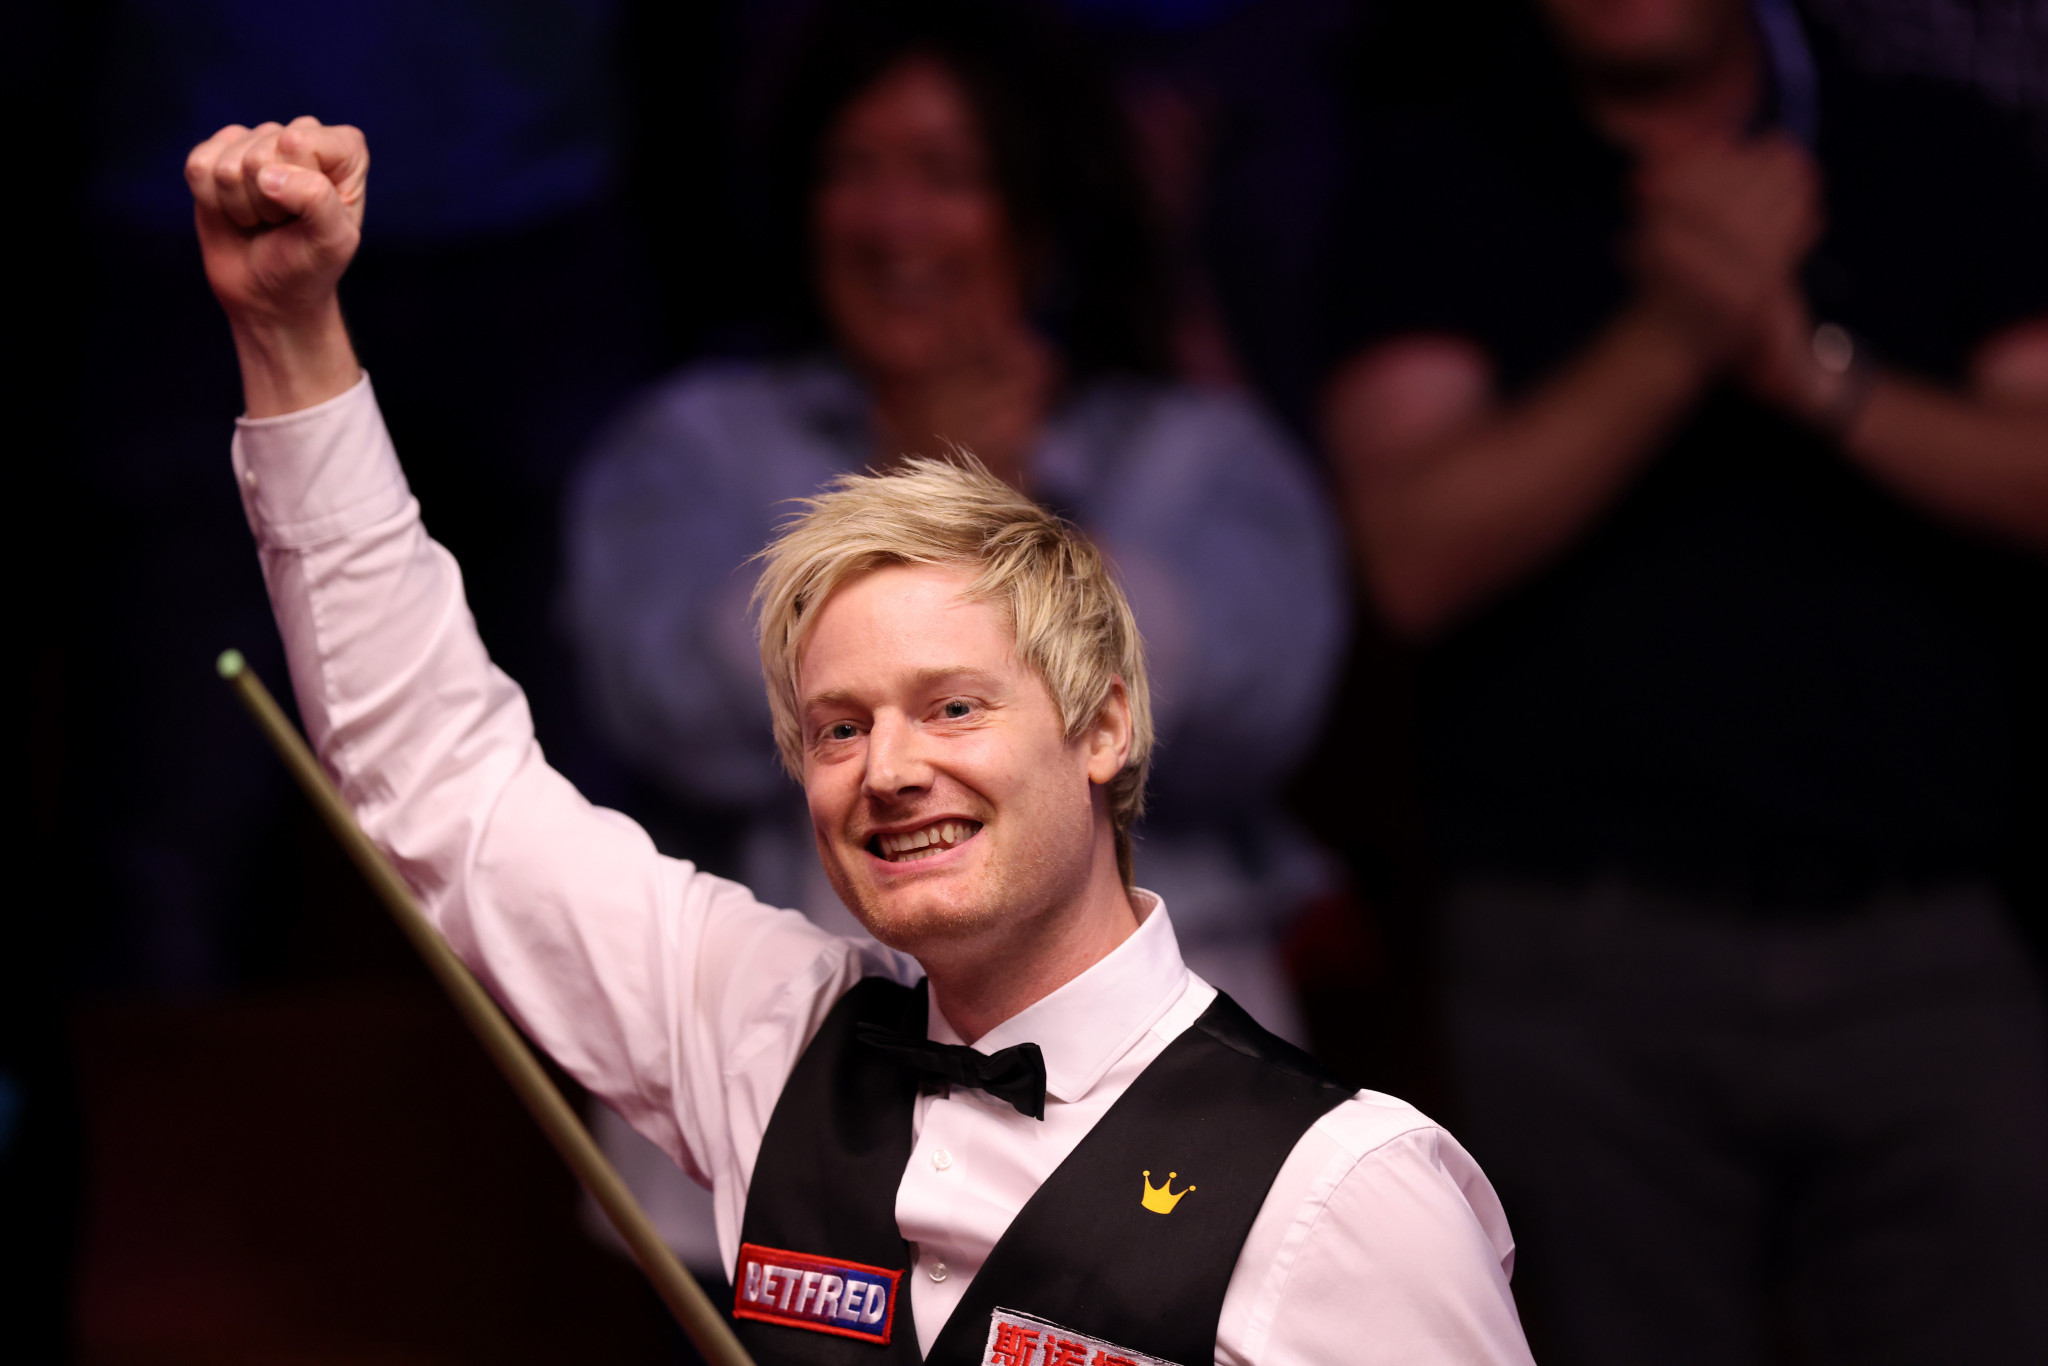 Robertson makes maximum before being beaten by Lisowski in deciding frame at World Snooker Championship